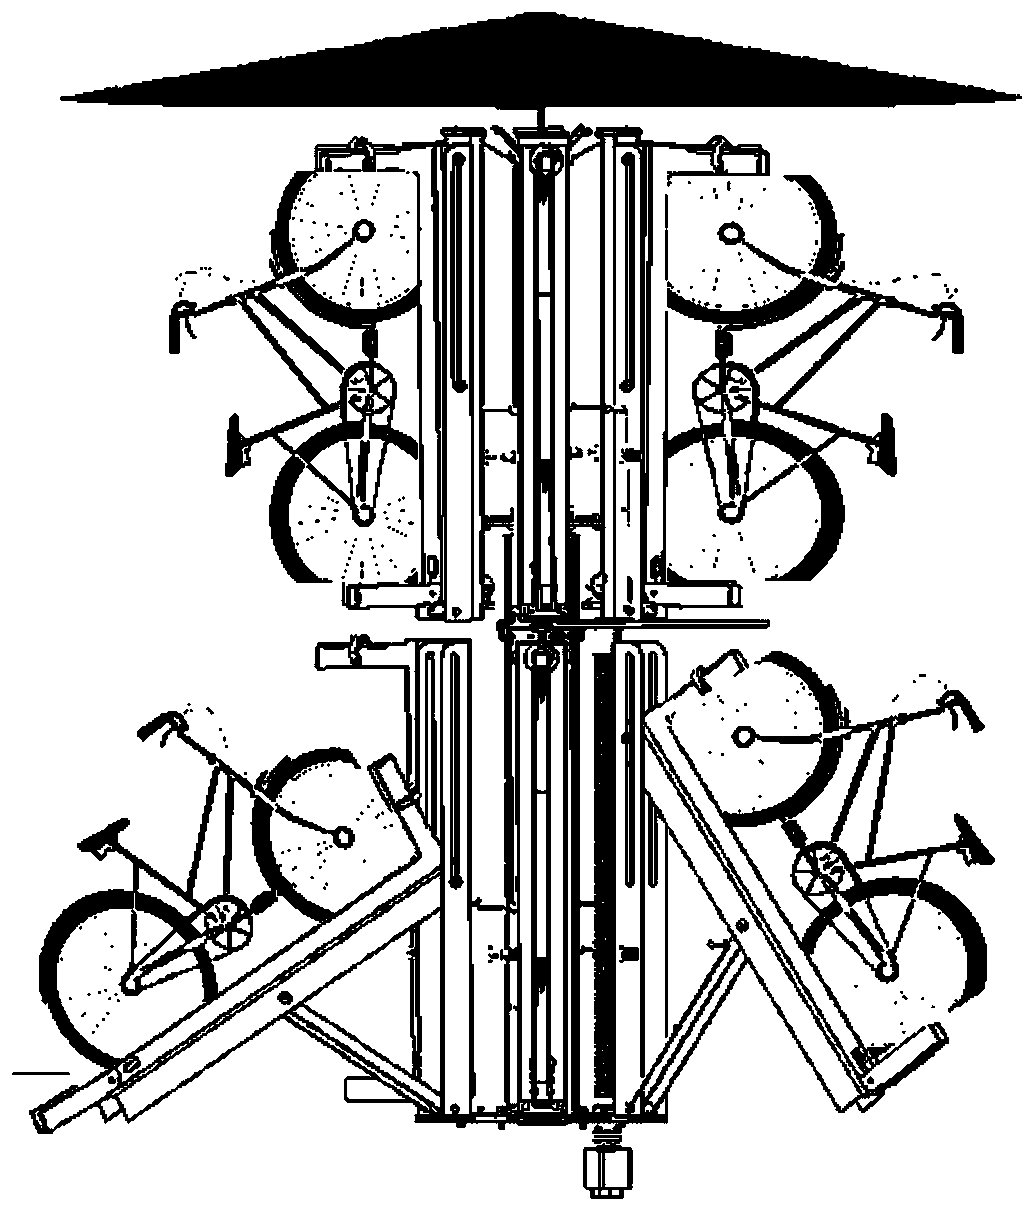 Tree-shaped double-layer bicycle parking device